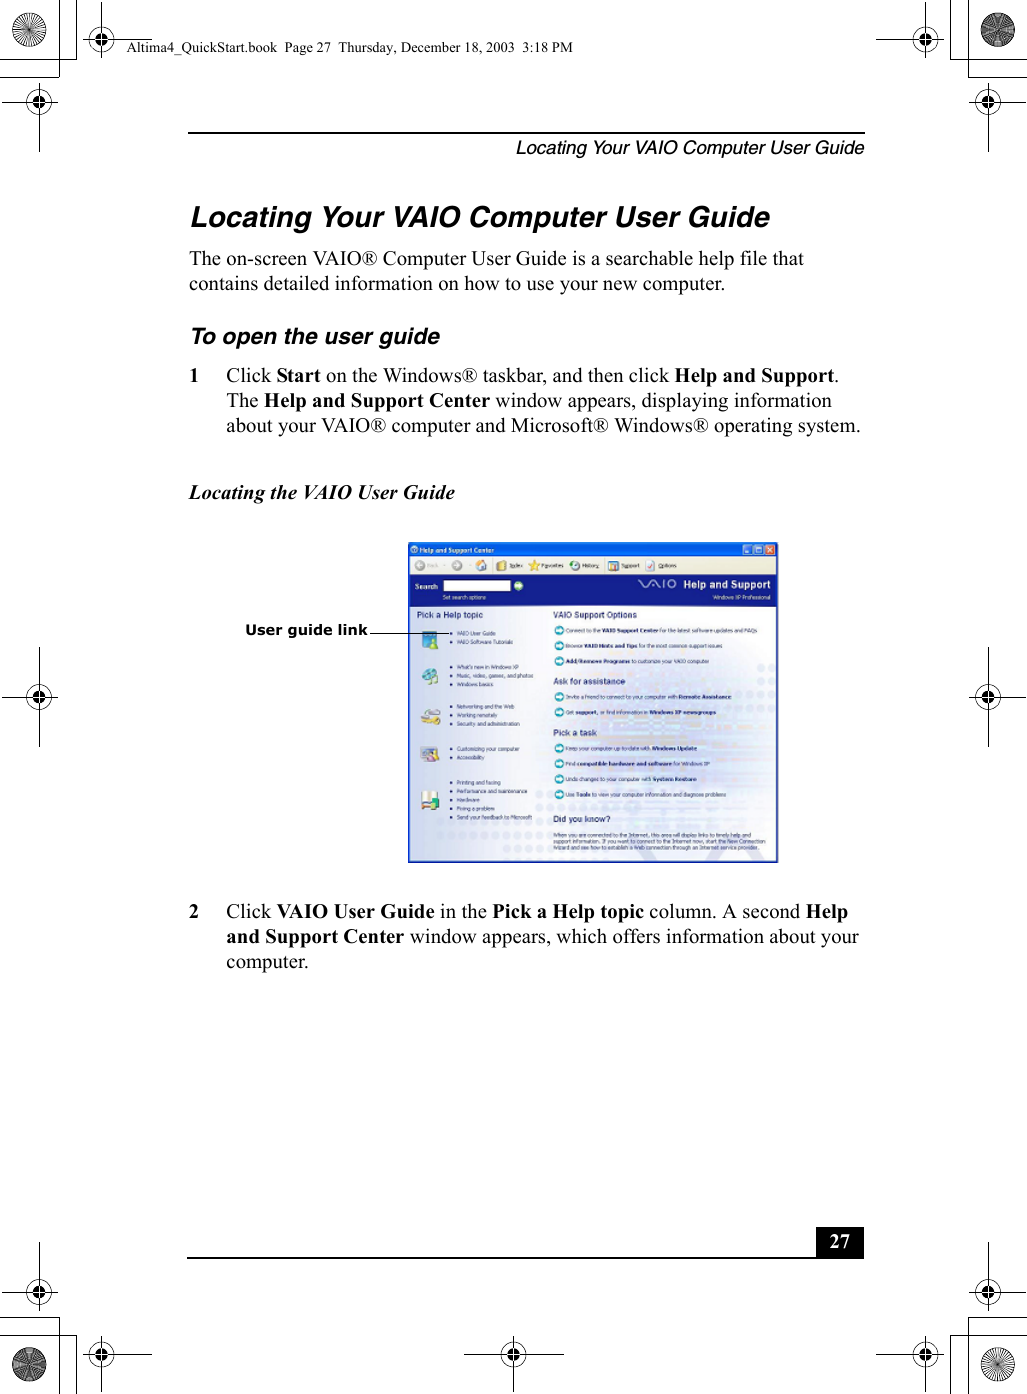 Locating Your VAIO Computer User Guide27Locating Your VAIO Computer User GuideThe on-screen VAIO® Computer User Guide is a searchable help file that contains detailed information on how to use your new computer. To open the user guide 1Click Start on the Windows® taskbar, and then click Help and Support. The Help and Support Center window appears, displaying information about your VAIO® computer and Microsoft® Windows® operating system.2Click VAIO User Guide in the Pick a Help topic column. A second Help and Support Center window appears, which offers information about your computer.Locating the VAIO User Guide User guide linkAltima4_QuickStart.book  Page 27  Thursday, December 18, 2003  3:18 PM